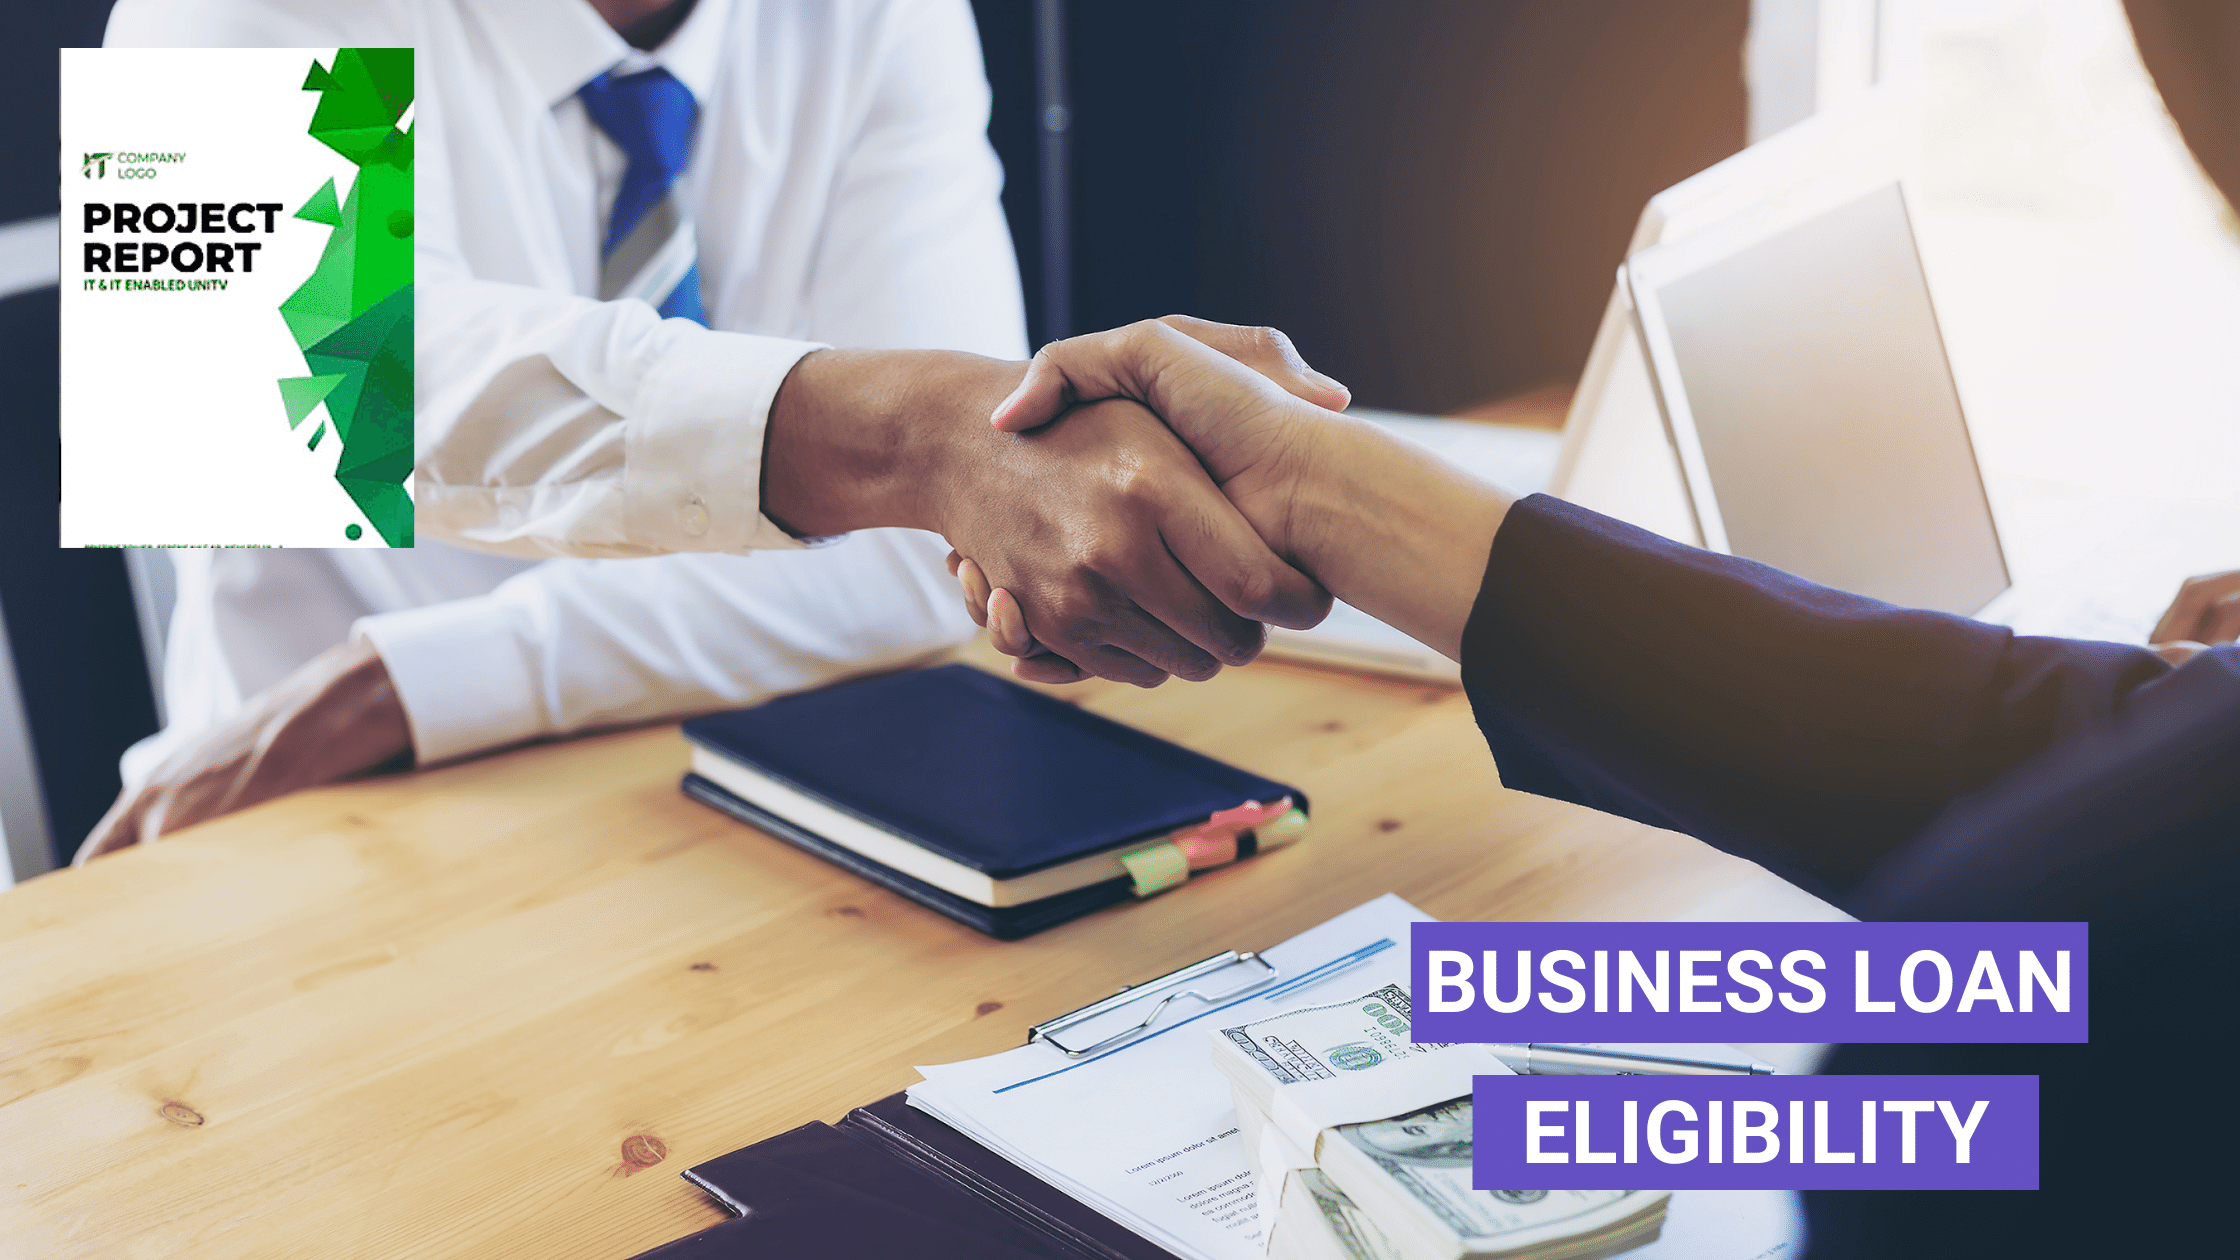 Business loan eligibility